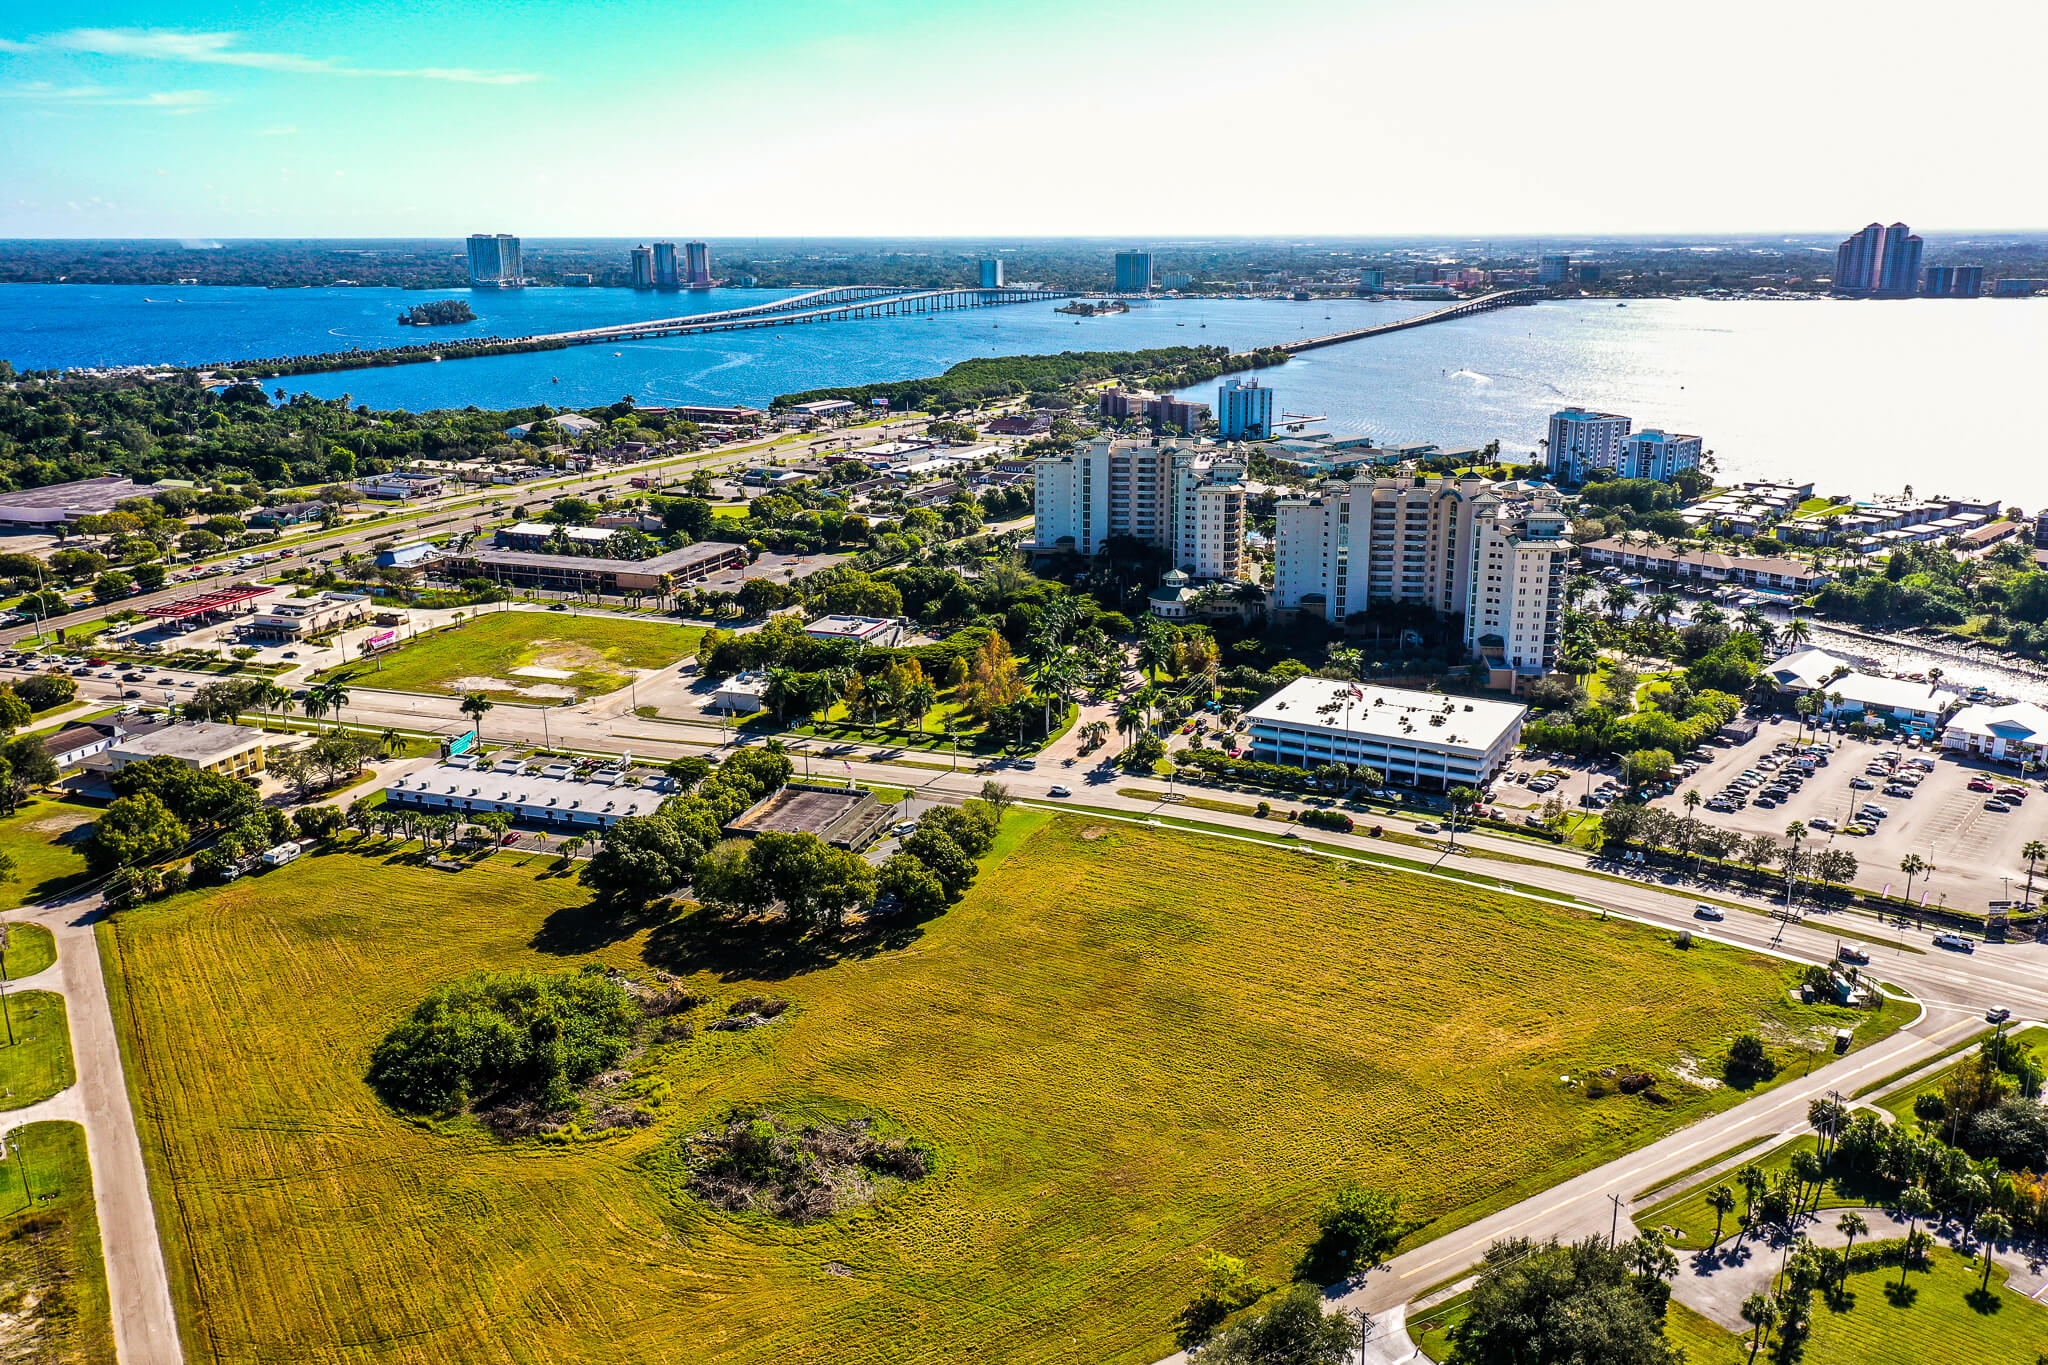 It is best to buy undeveloped land in Lee County, and Alec Salameh has inventory and knowledge about Lee County, including Fort Myers.